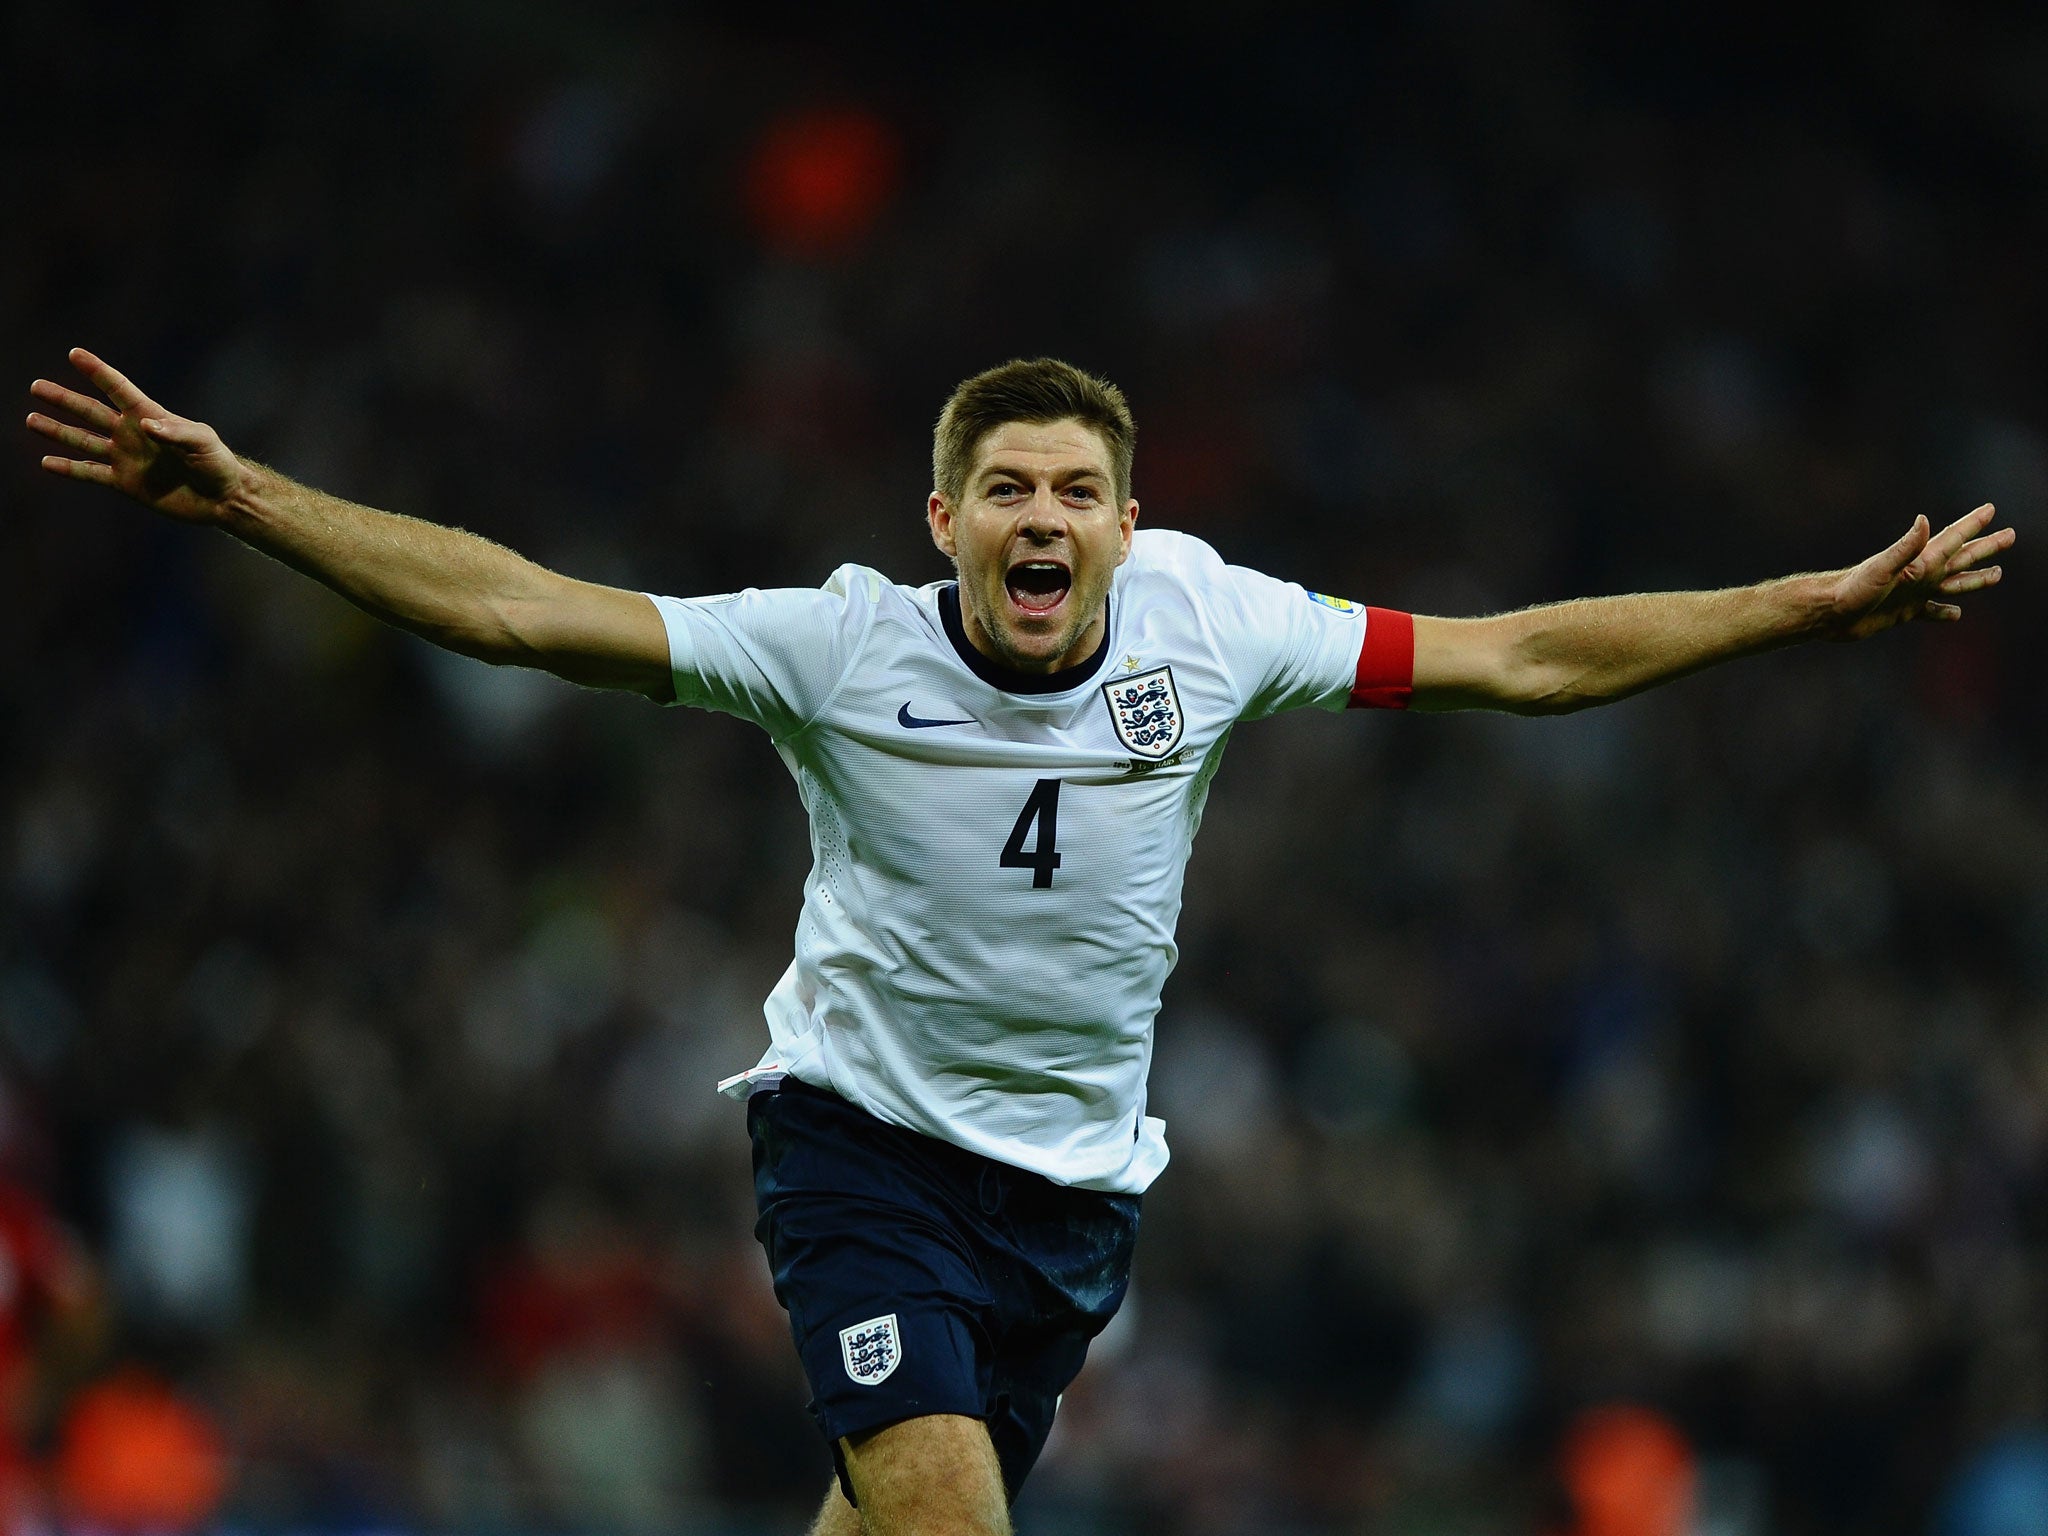 Steven Gerrard celebrates his goal for England against Poland that sent them through to next year's World Cup in Brazil